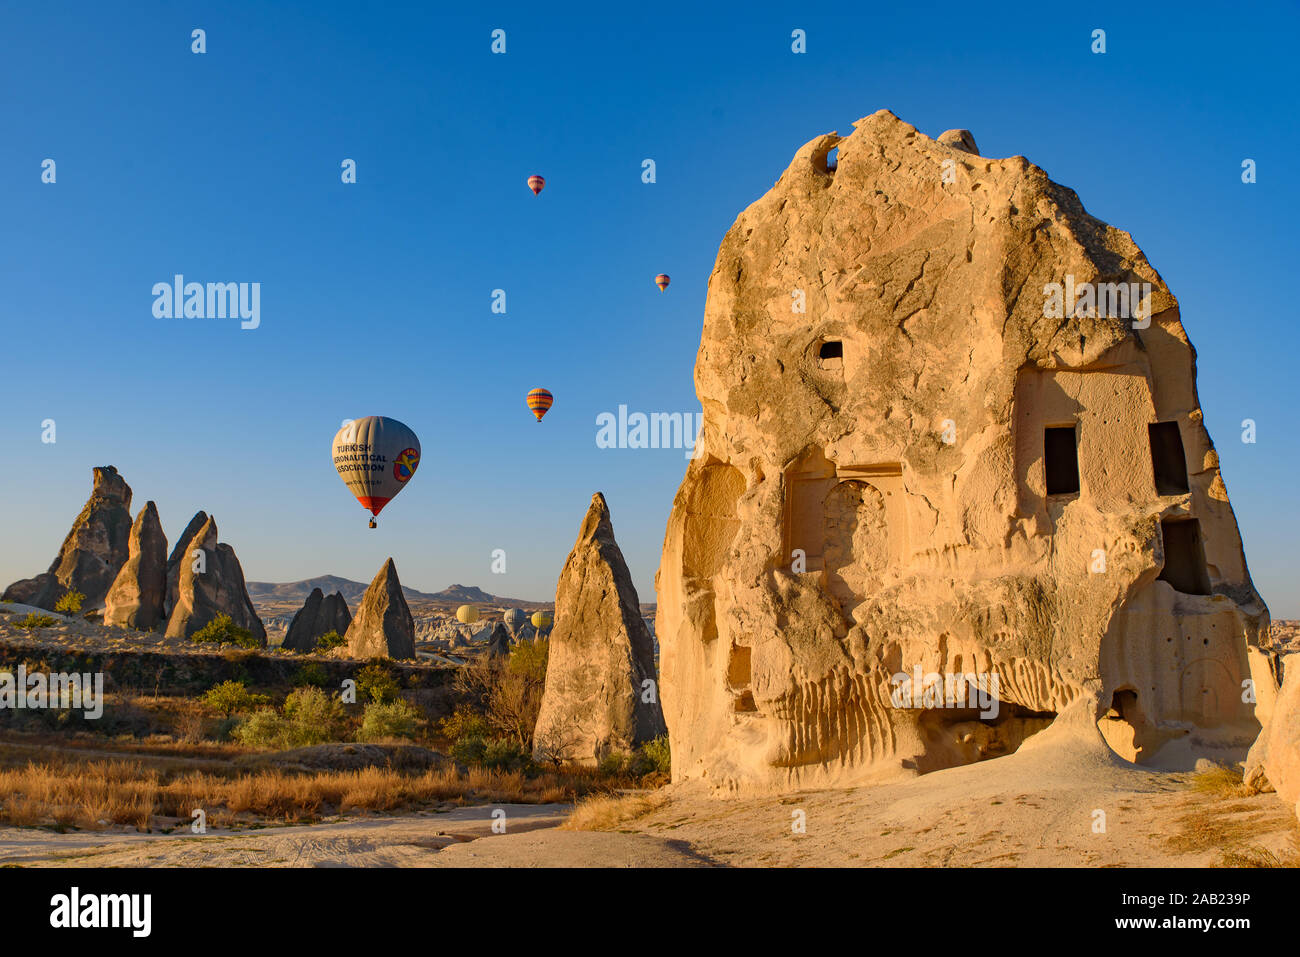 Flying hot air balloons and rock landscape at sunrise time in Goreme, Cappadocia, Turkey Stock Photo